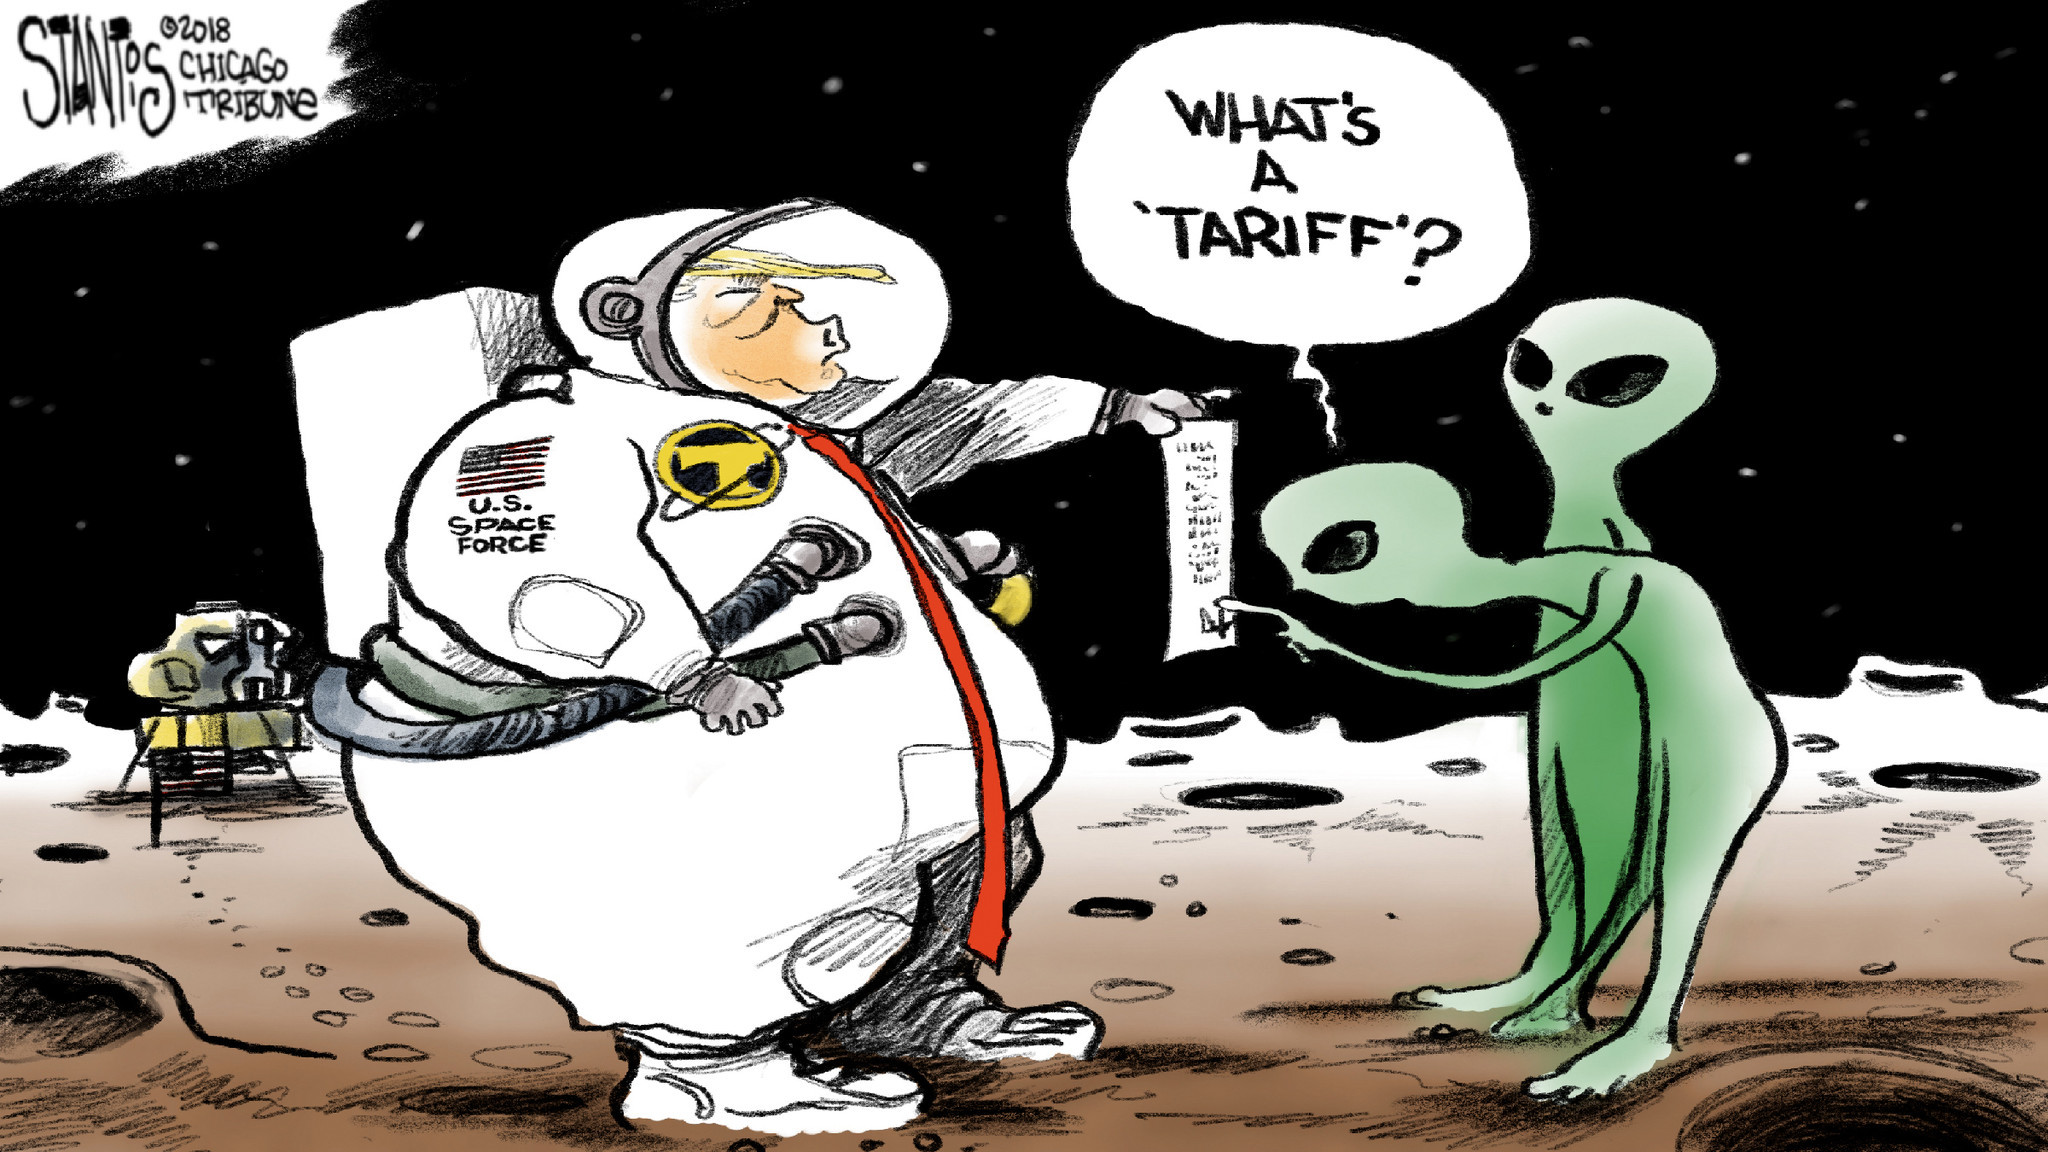 ct-space-force-trump-20180619